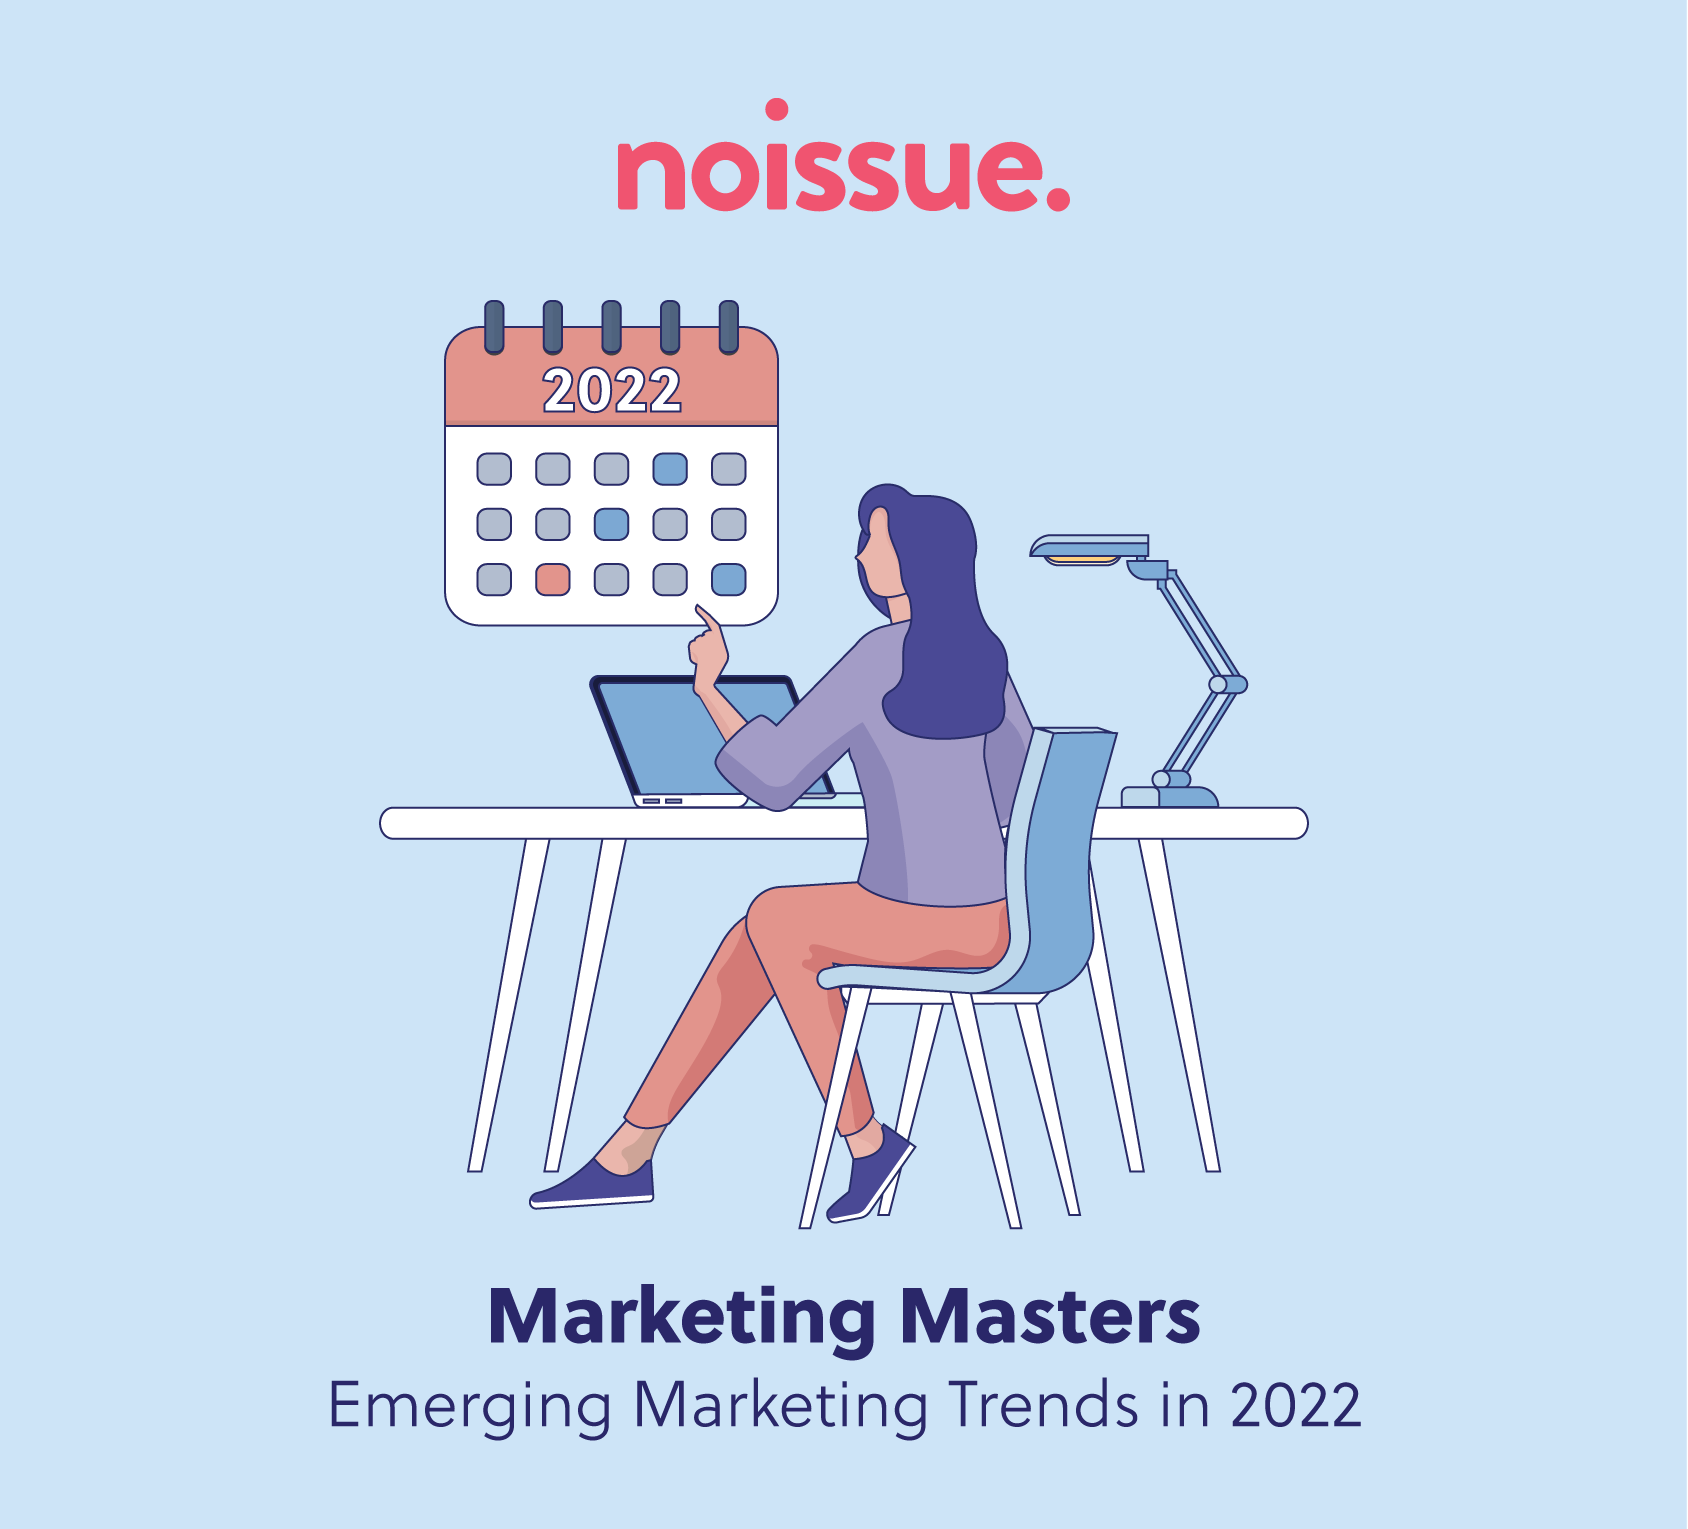 7 Emerging Marketing Trends Small Businesses Should Watch in 2022